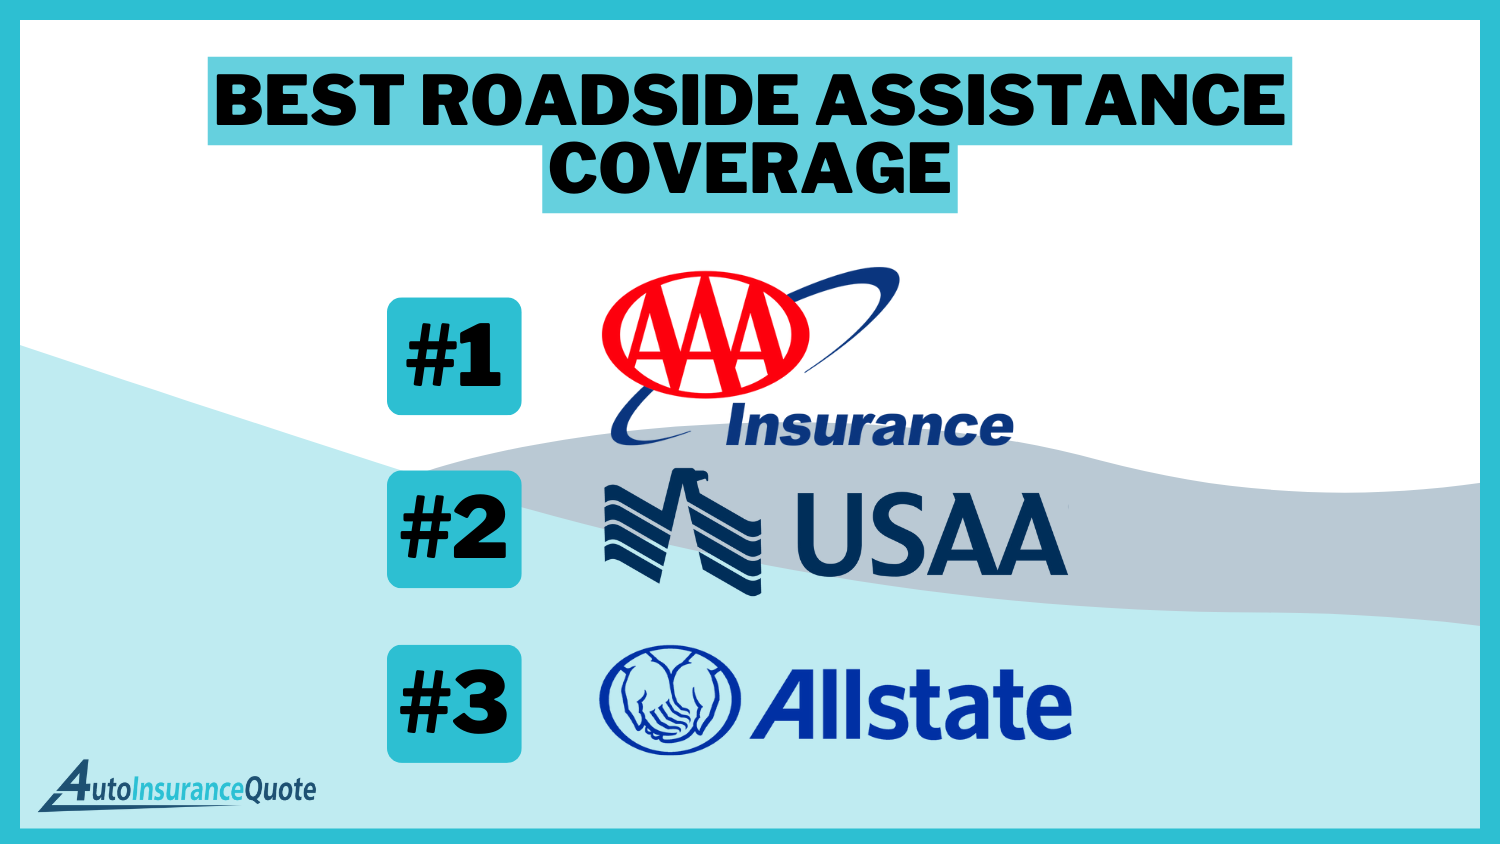 Best Roadside Assistance Coverage: AAA, USAA, and Allstate.